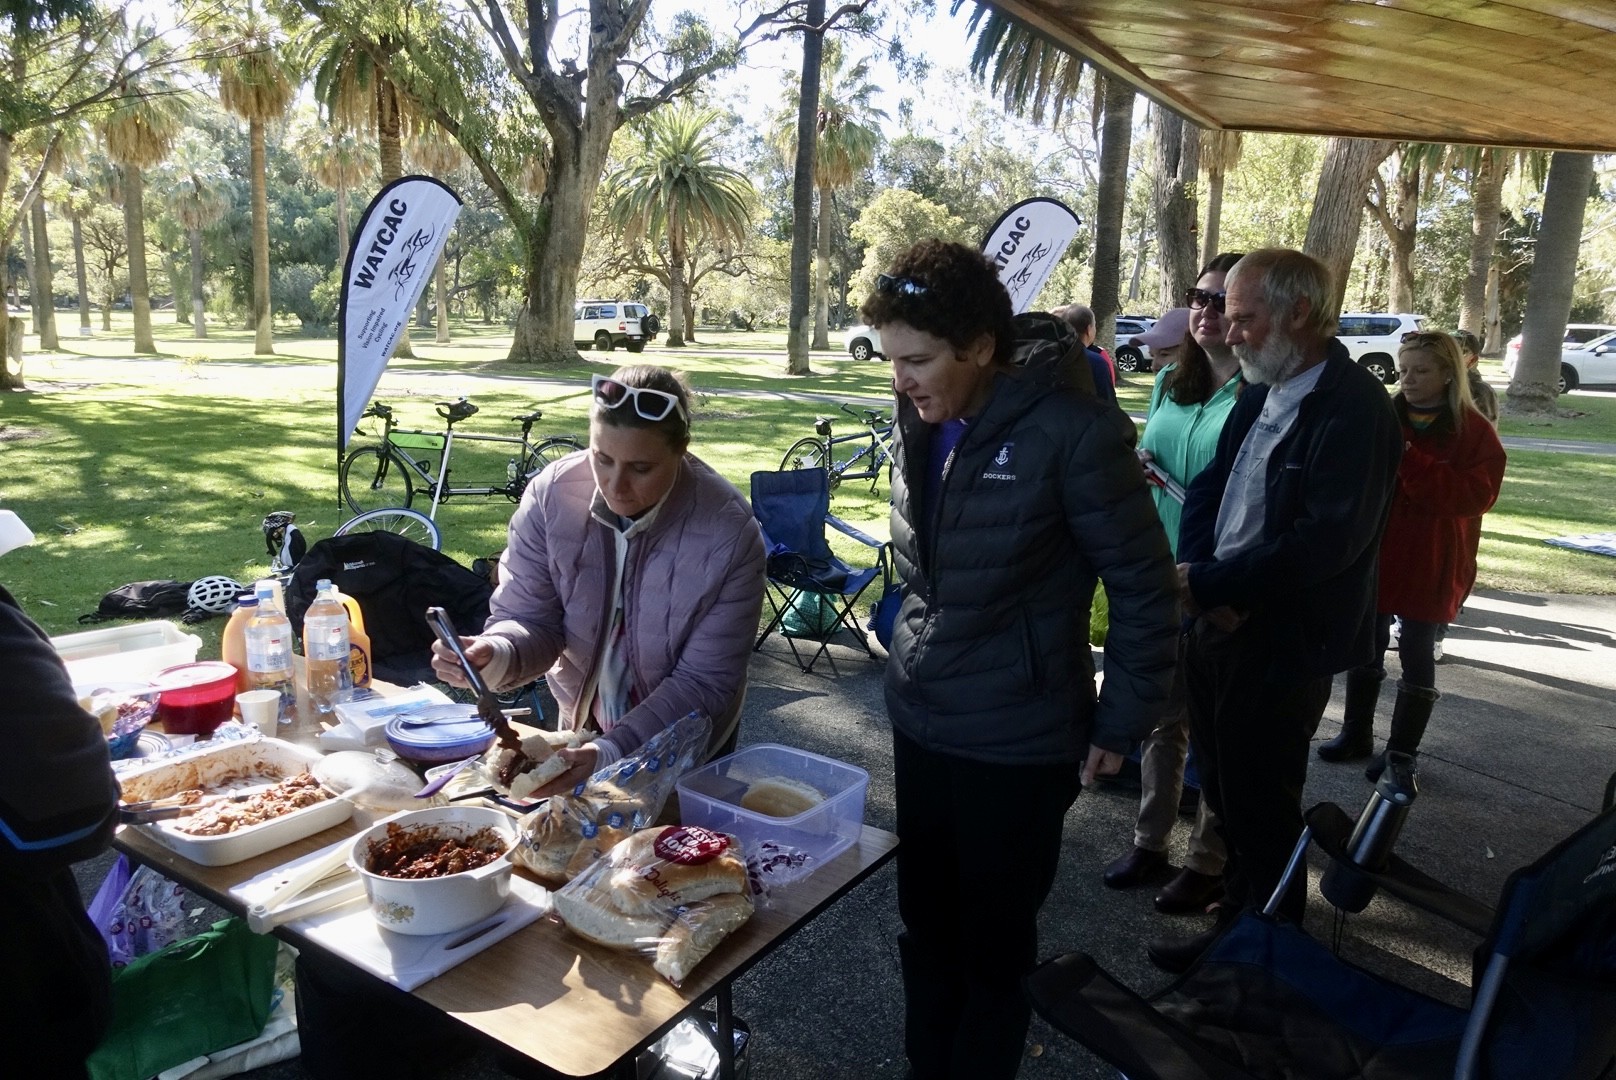 Fuelling up with a delicious filled roll helped keep the winter chills at bay.  The image shows guest lining up for food self service at a table in the picnic area.